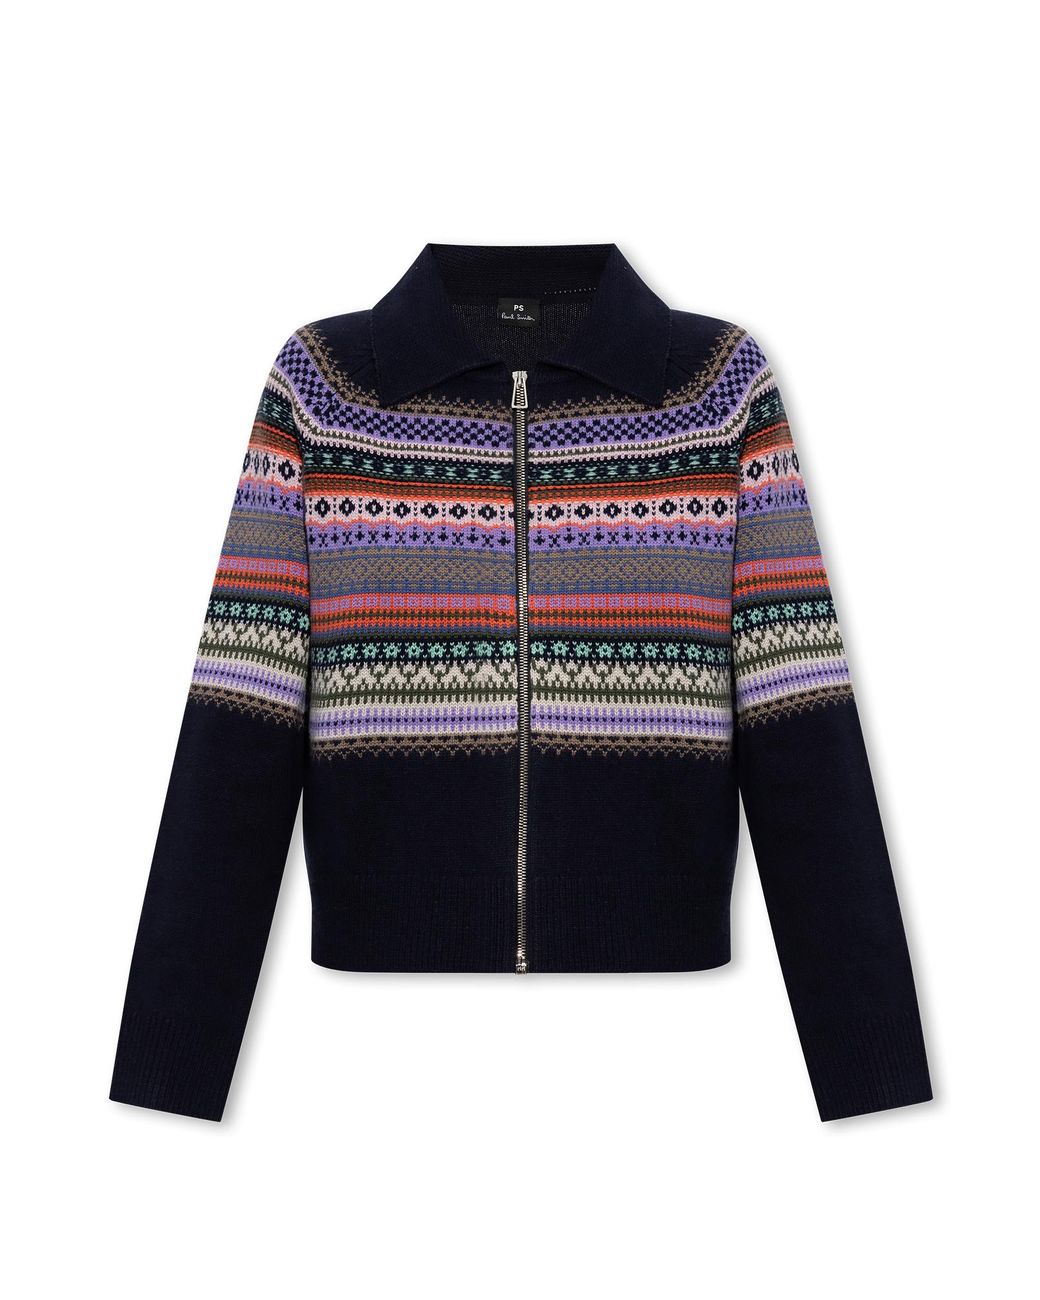 PS by Paul Smith Wool Cardigan in Black | Lyst